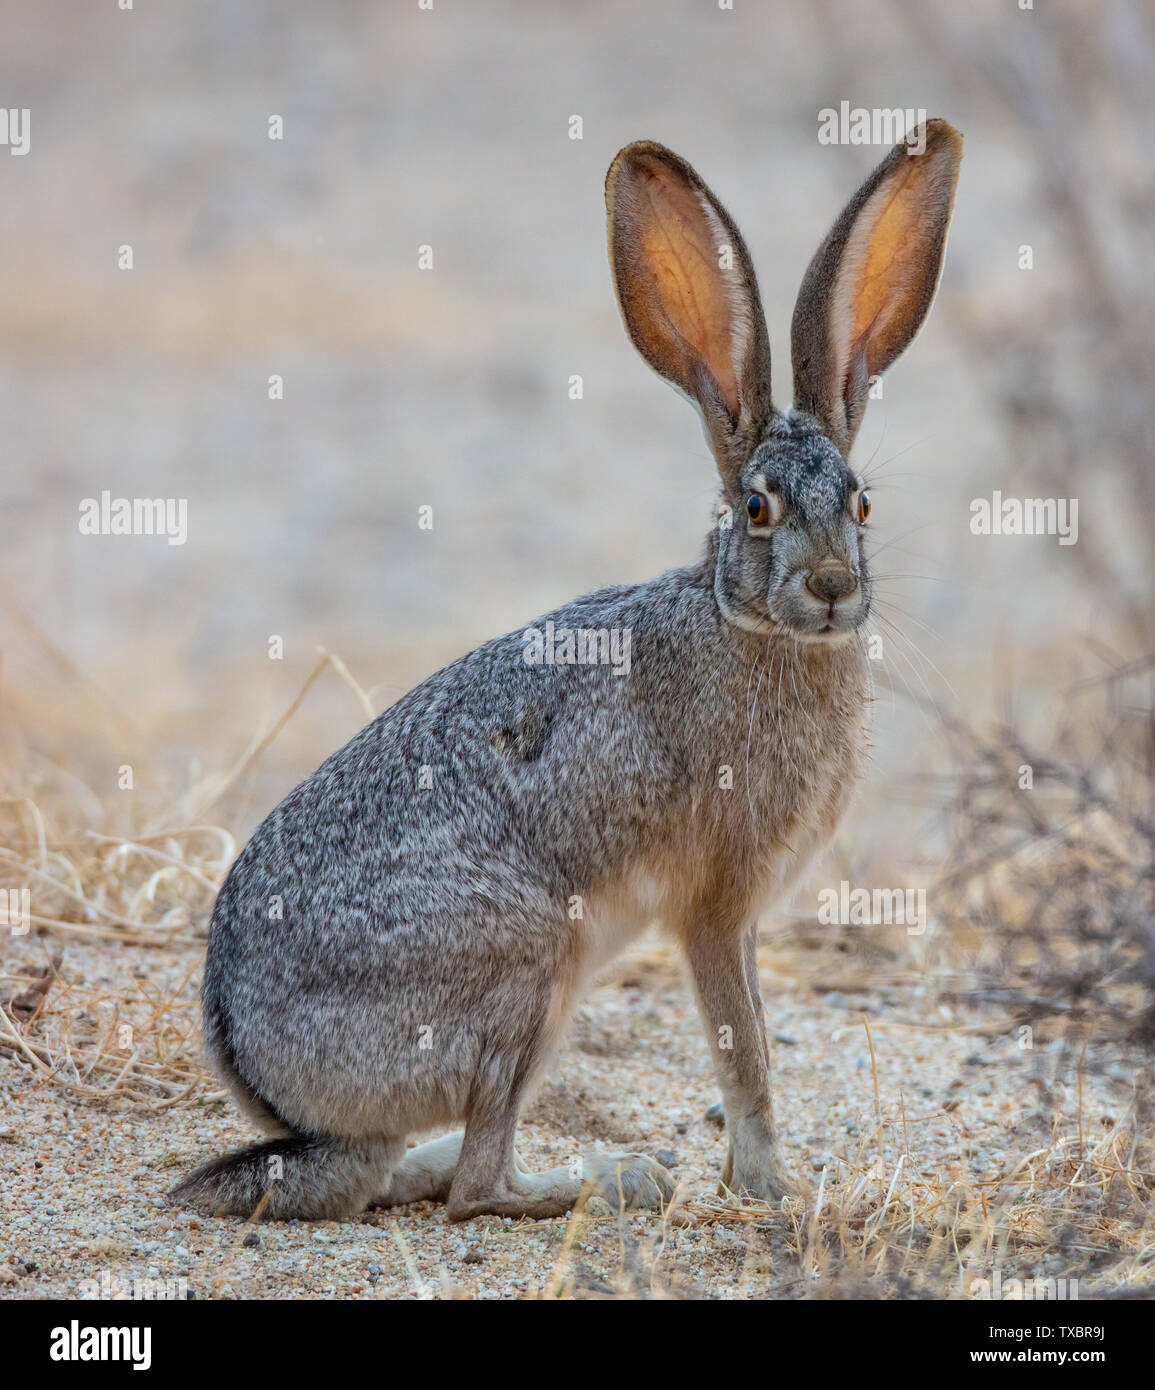 A beautiful black-tailed jackrabbit (Lepus californicus) or American desert hare sits in the sand of Borrego Springs, Californiaåç Stock Photo